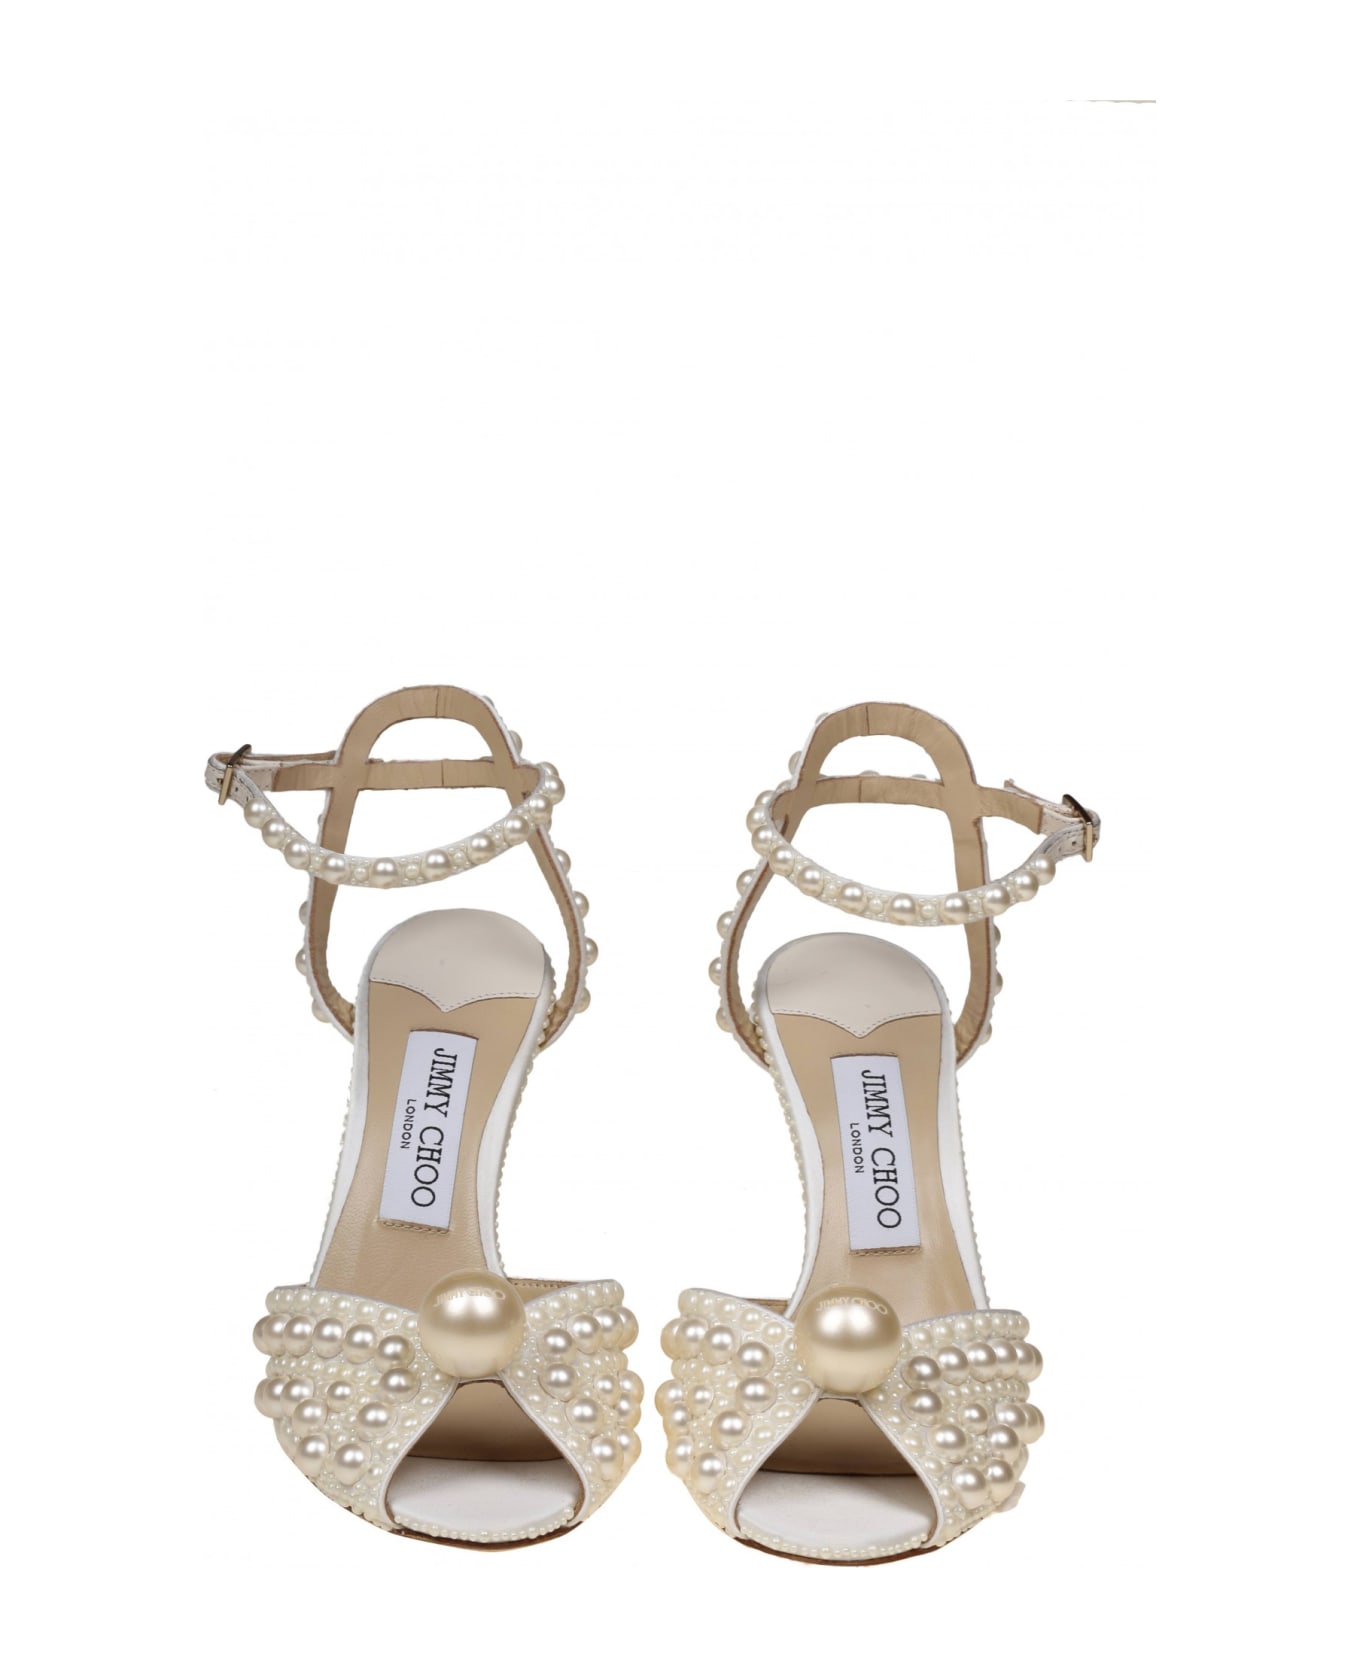 Jimmy Choo Sacoro Sandal In Satin With Applied Pearls - White/White サンダル